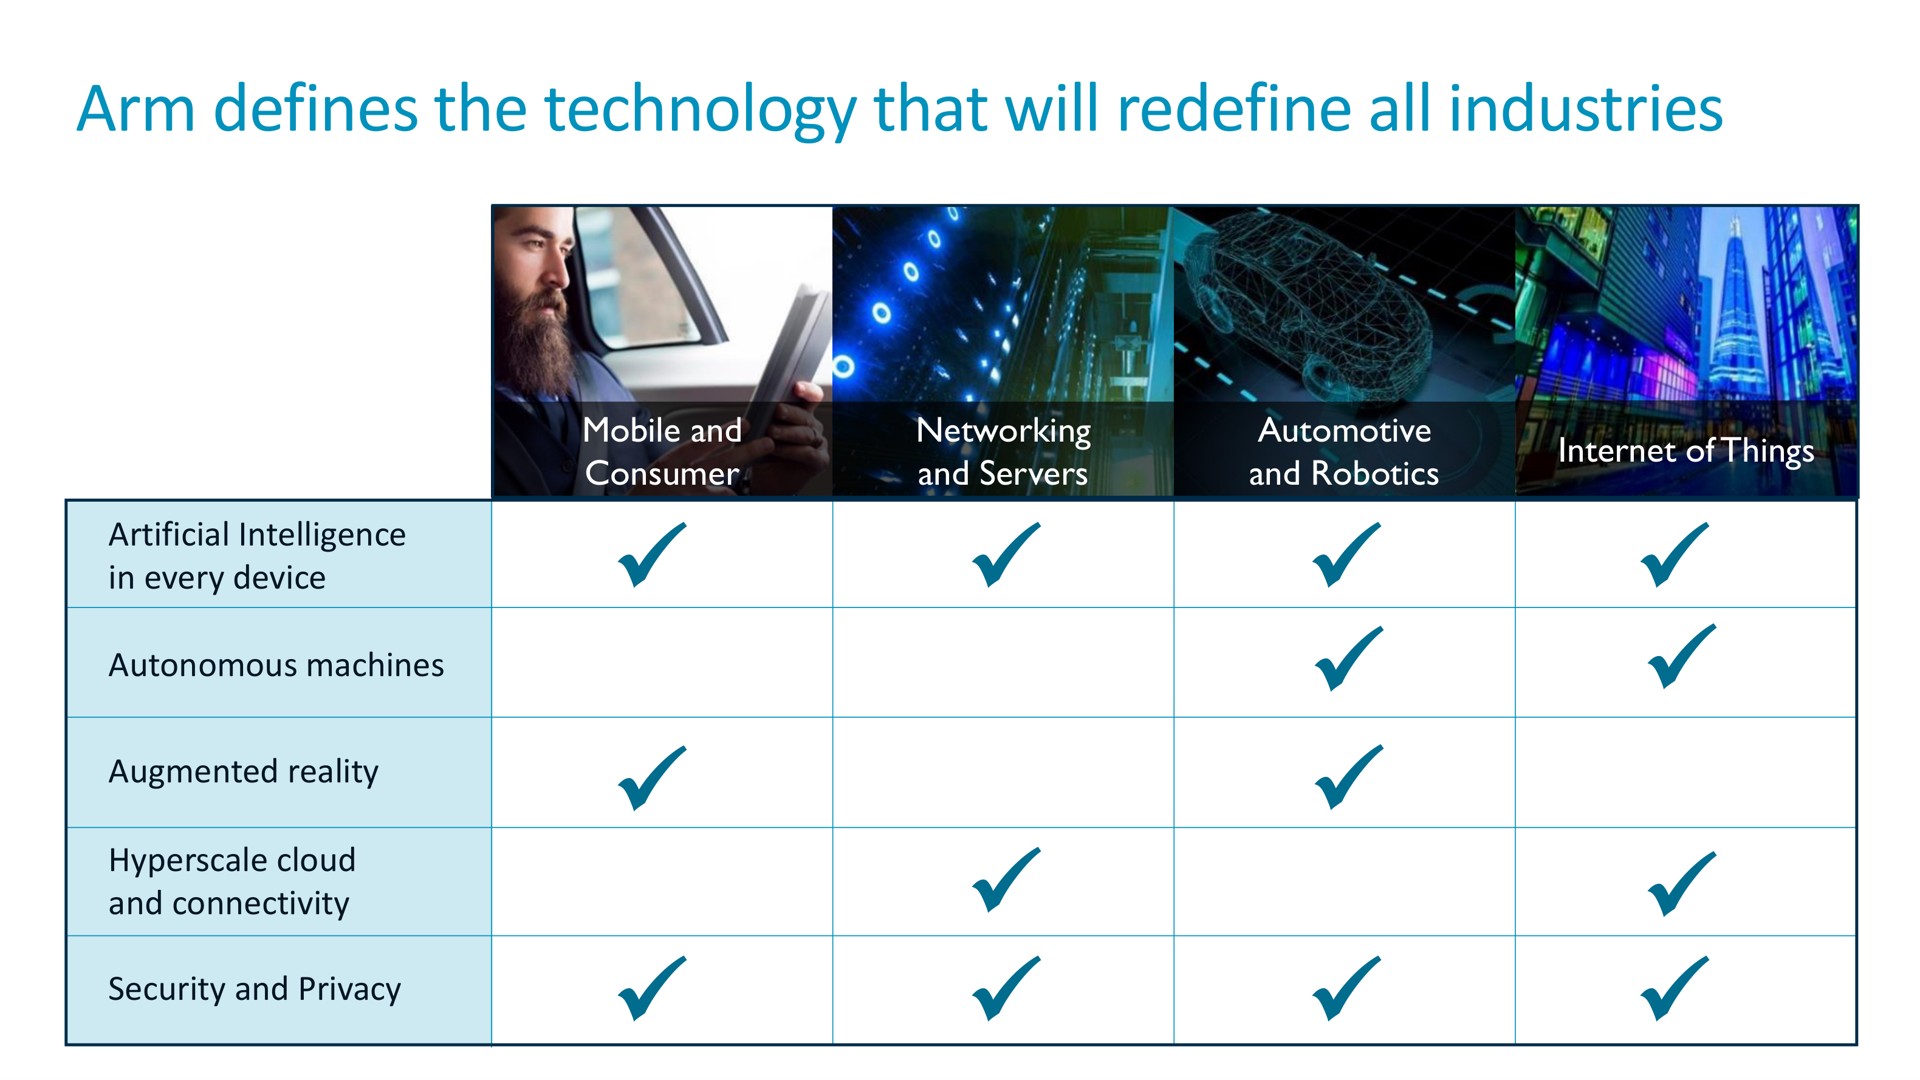 arm defines the technology that will redefine all industries | SoftBank